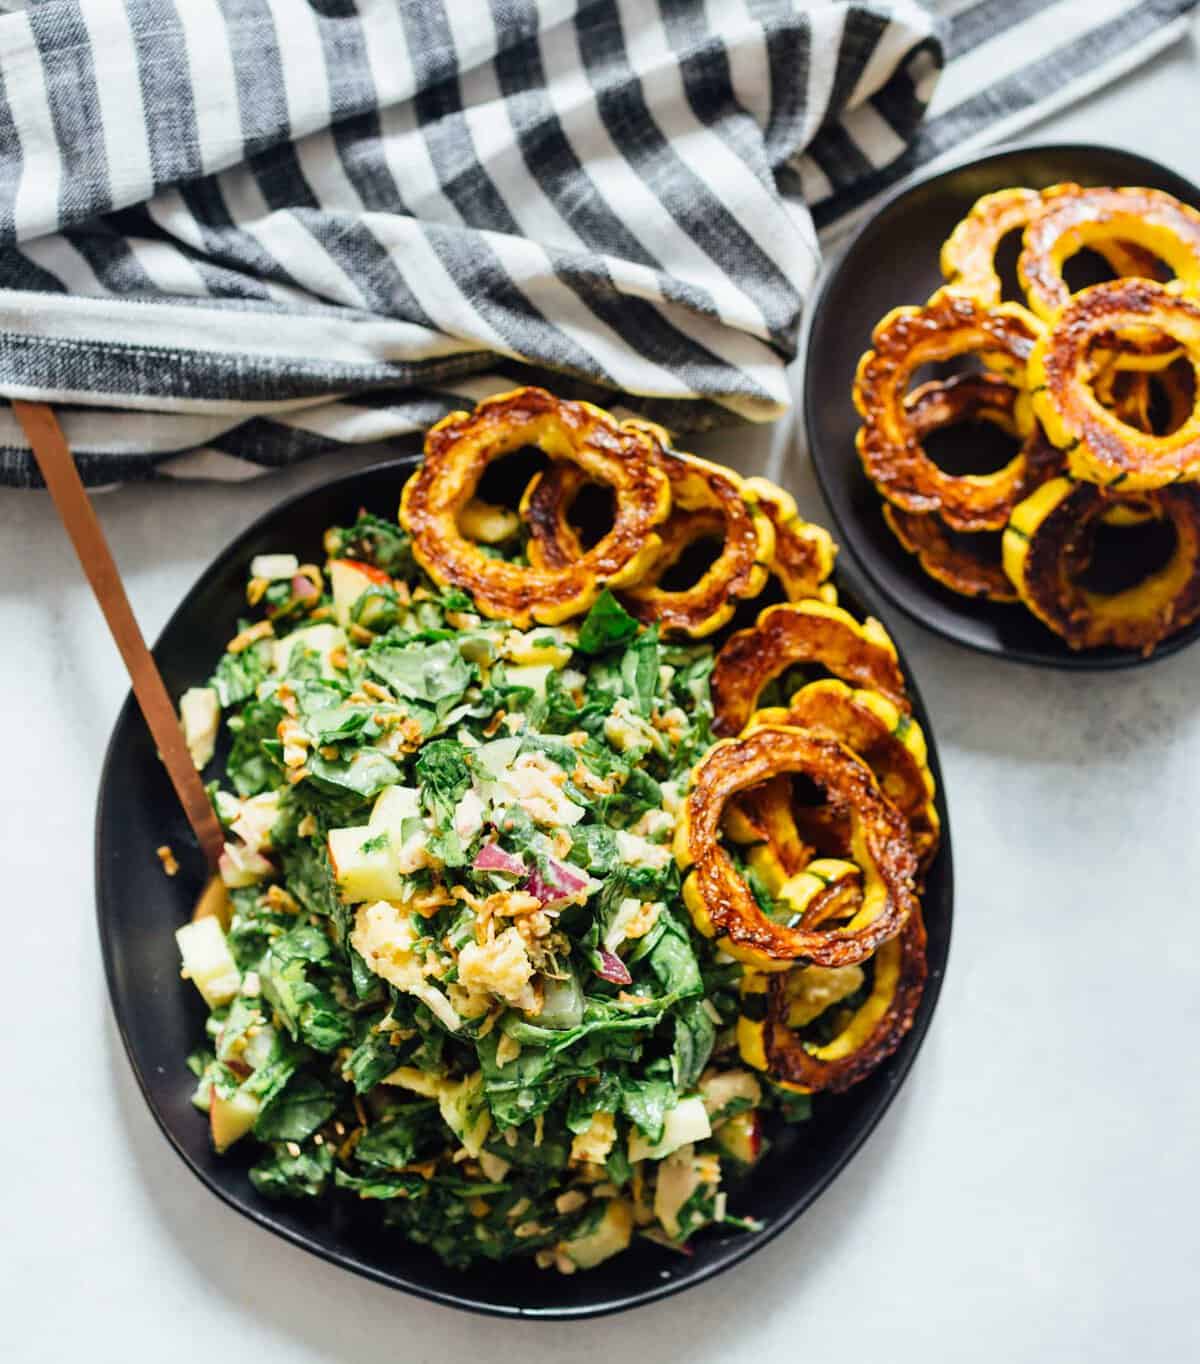 A spinach tuna salad topped with roasted delicata squash is a heavenly combination! The delicata squash gives it a unique yet distinct sweetness but it also adds volume to make this salad hearty and filling!